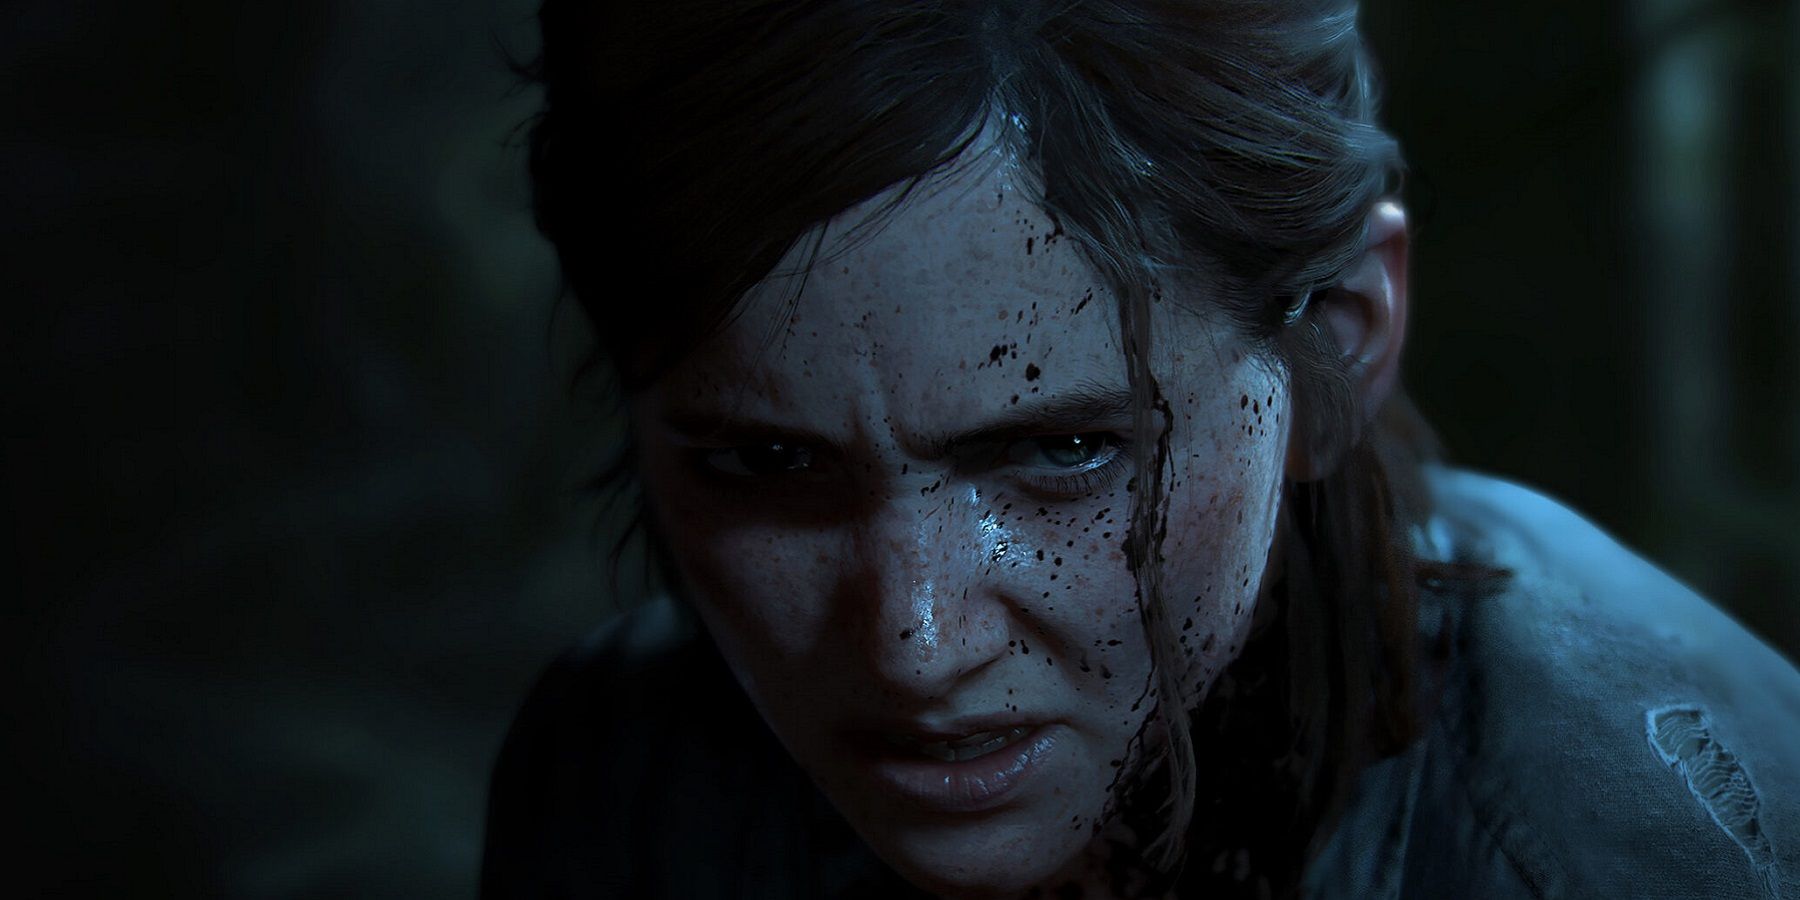 Screenshot from Last of Us 2 showing a close-up of Ellie's angry face.